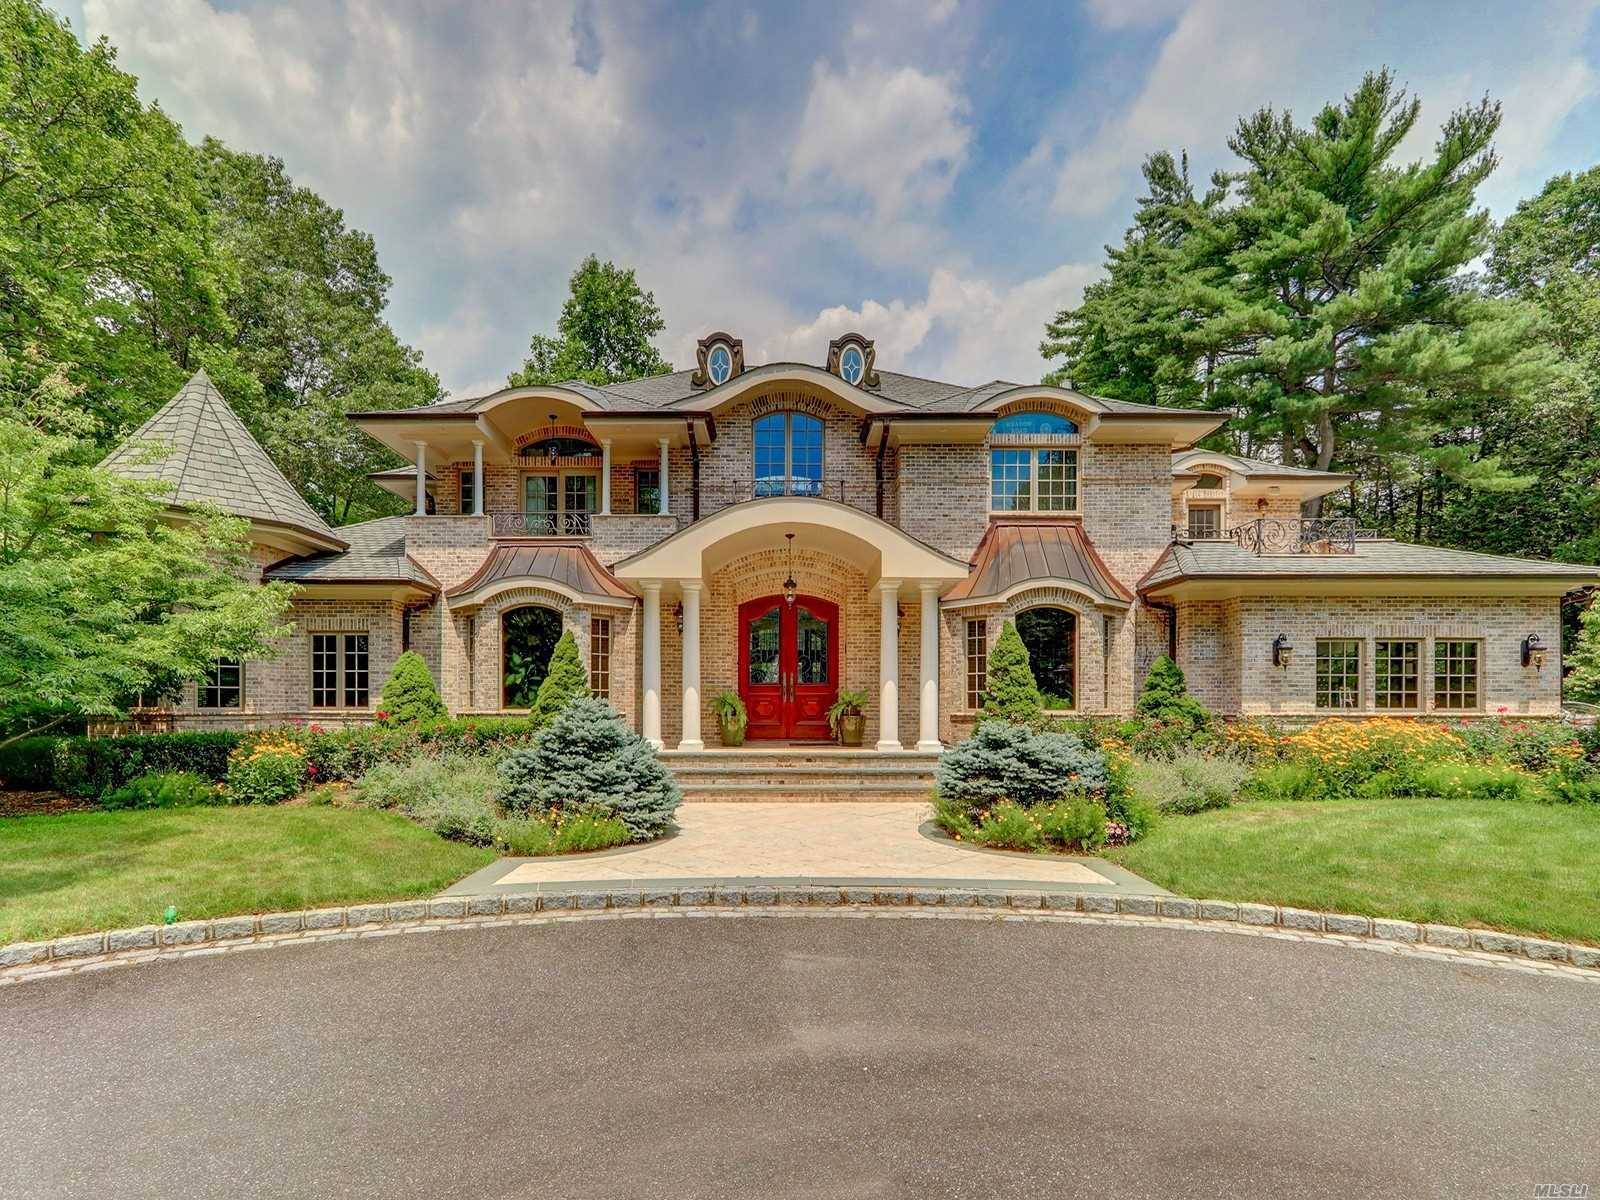 Welcome to this Sophisticated Elegant Brick Colonial with a Gated Private Entrance Leading To The Most Elegant Spacious Home on 2 Acres.